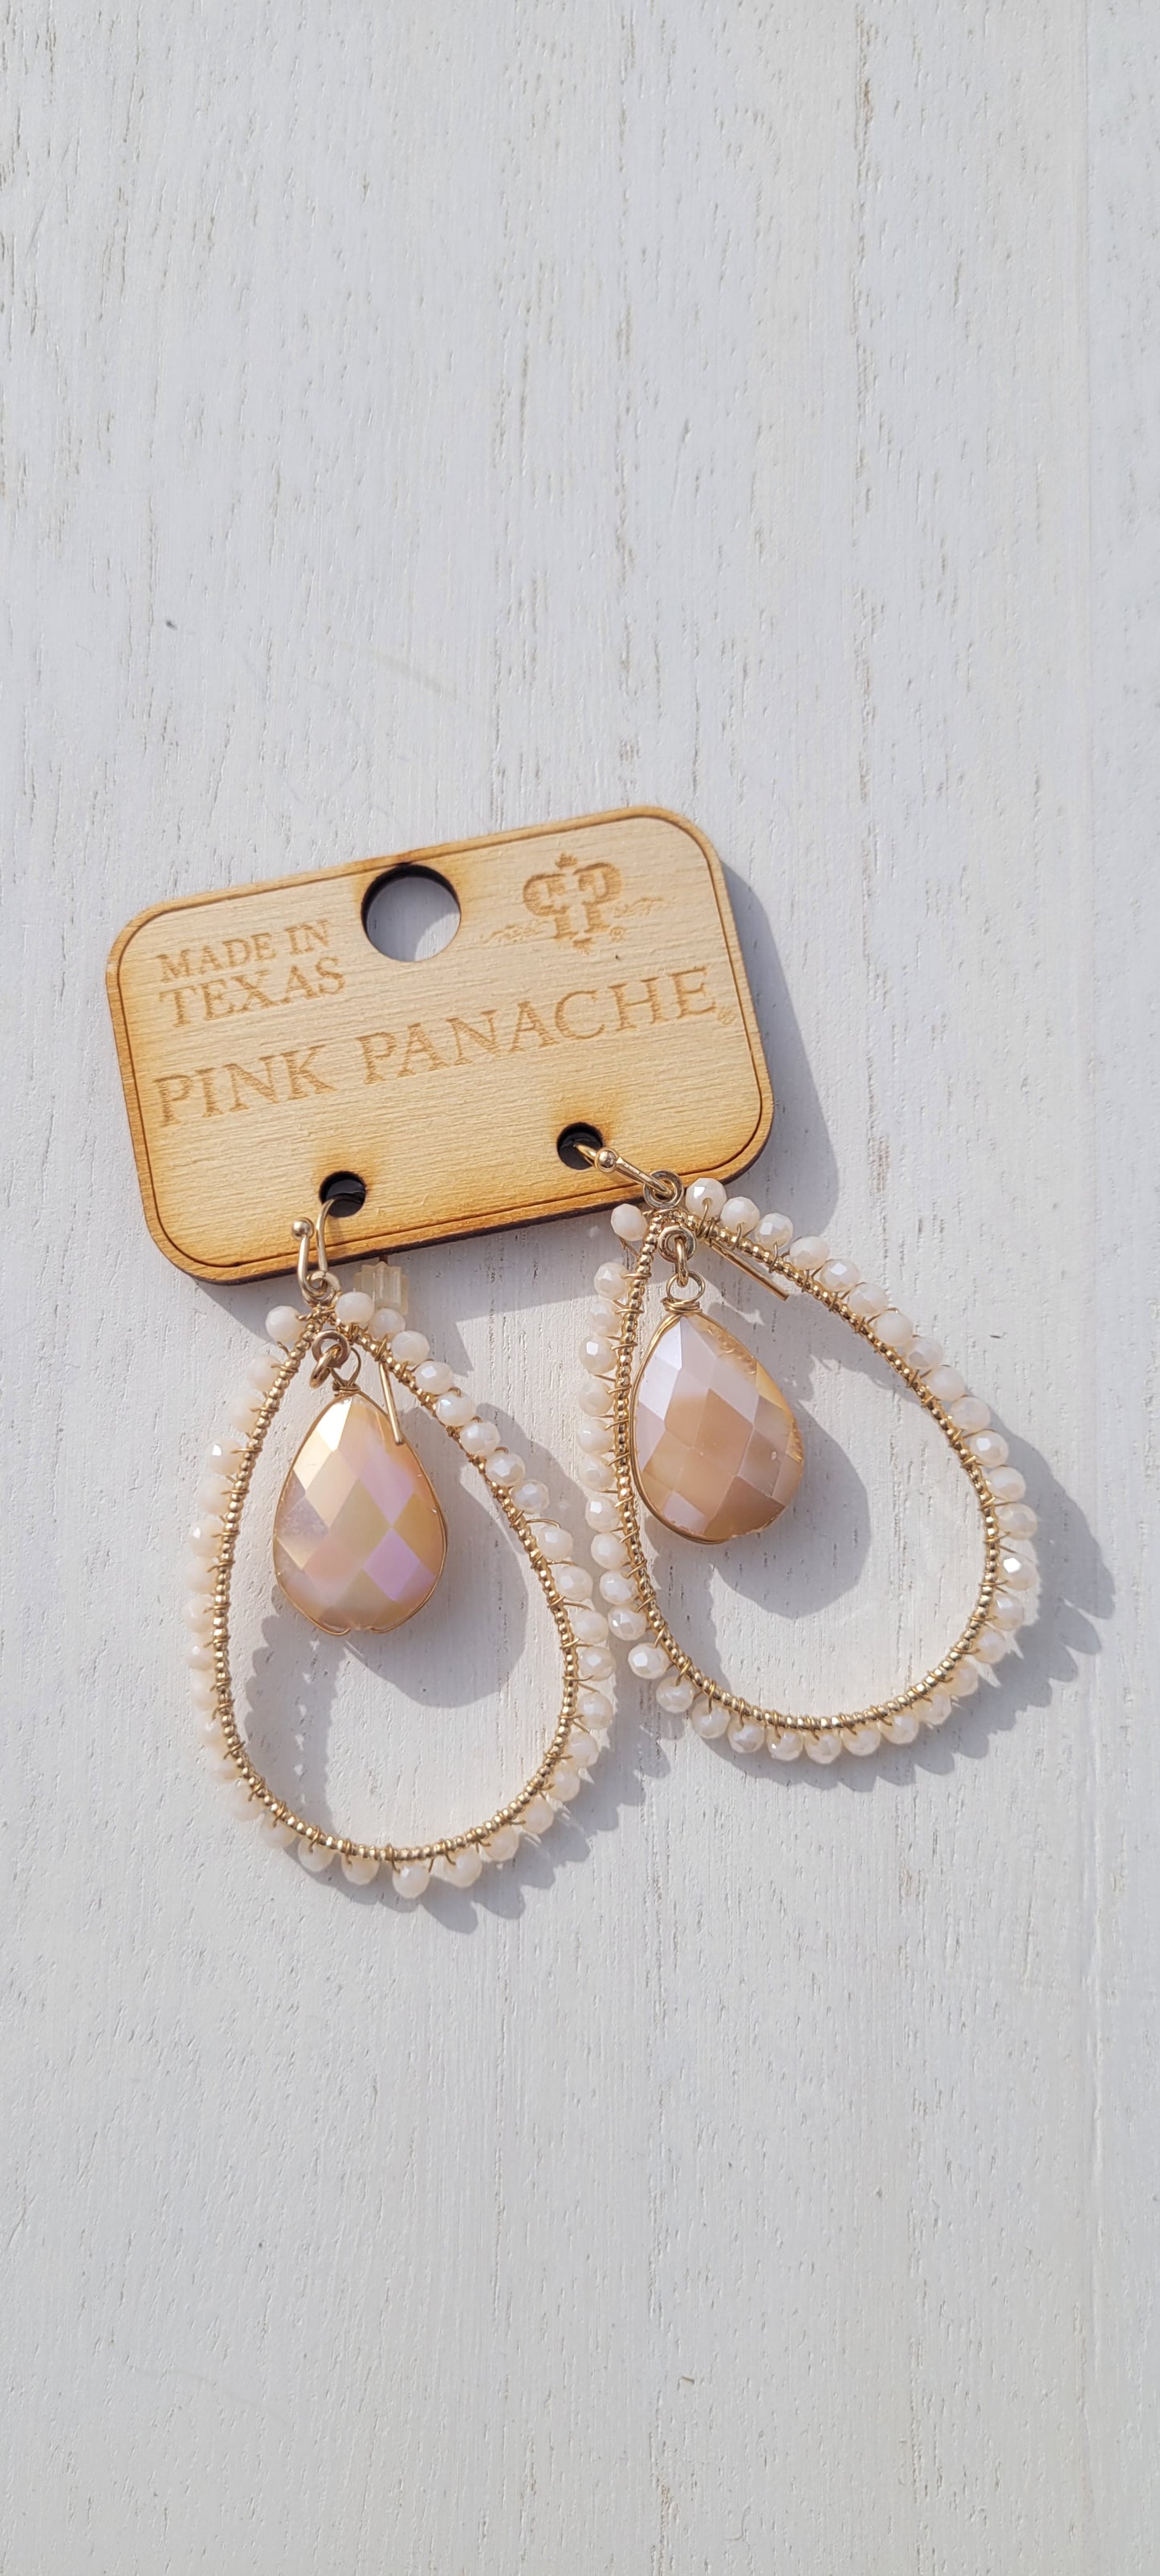 Pink Panache Earrings Color: Ivory tone crystal bead wrapped teardrop earring with large faceted teardrop charm Limited supply!  